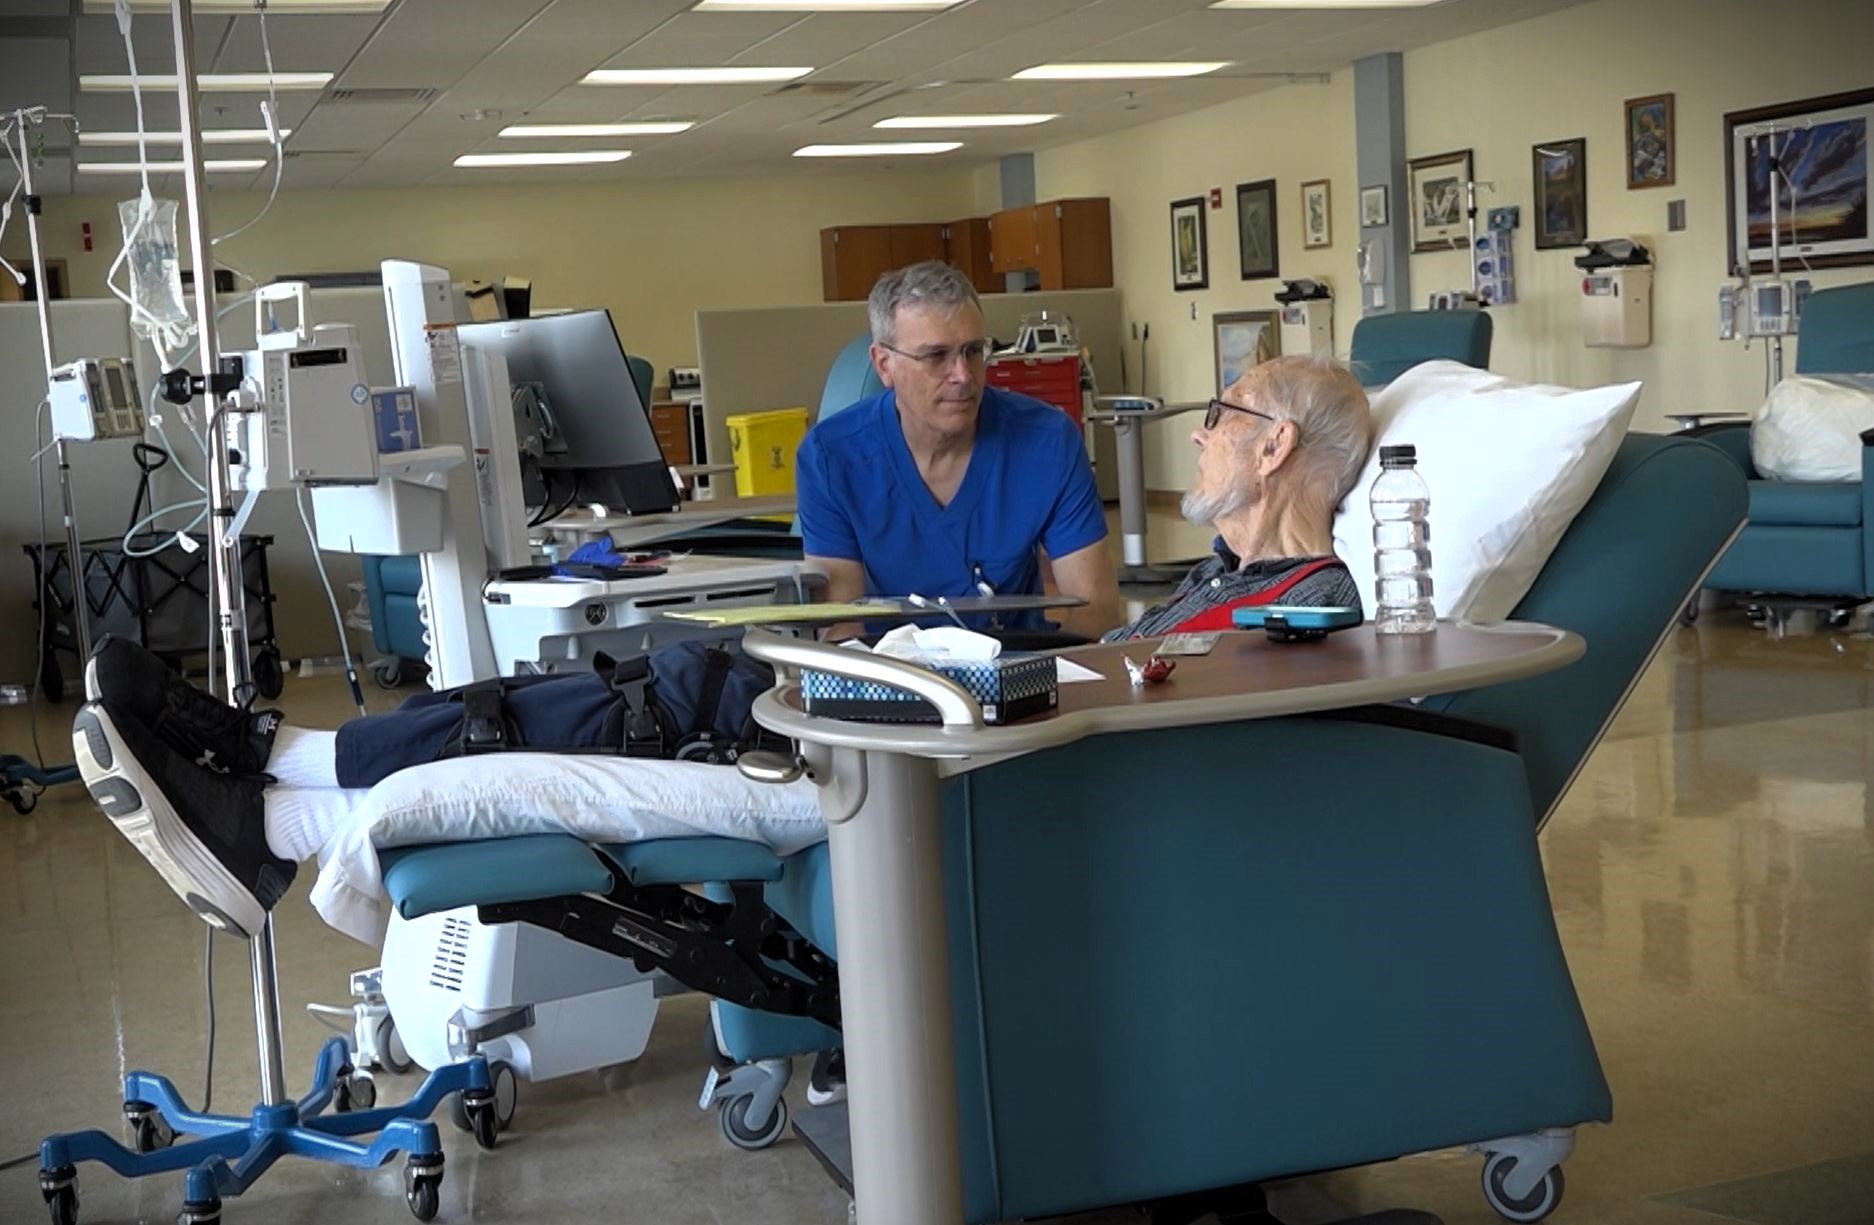 An elderly man lies on a medical recliner receiving treatment while conversing with a healthcare professional in a treatment room equipped with medical devices.